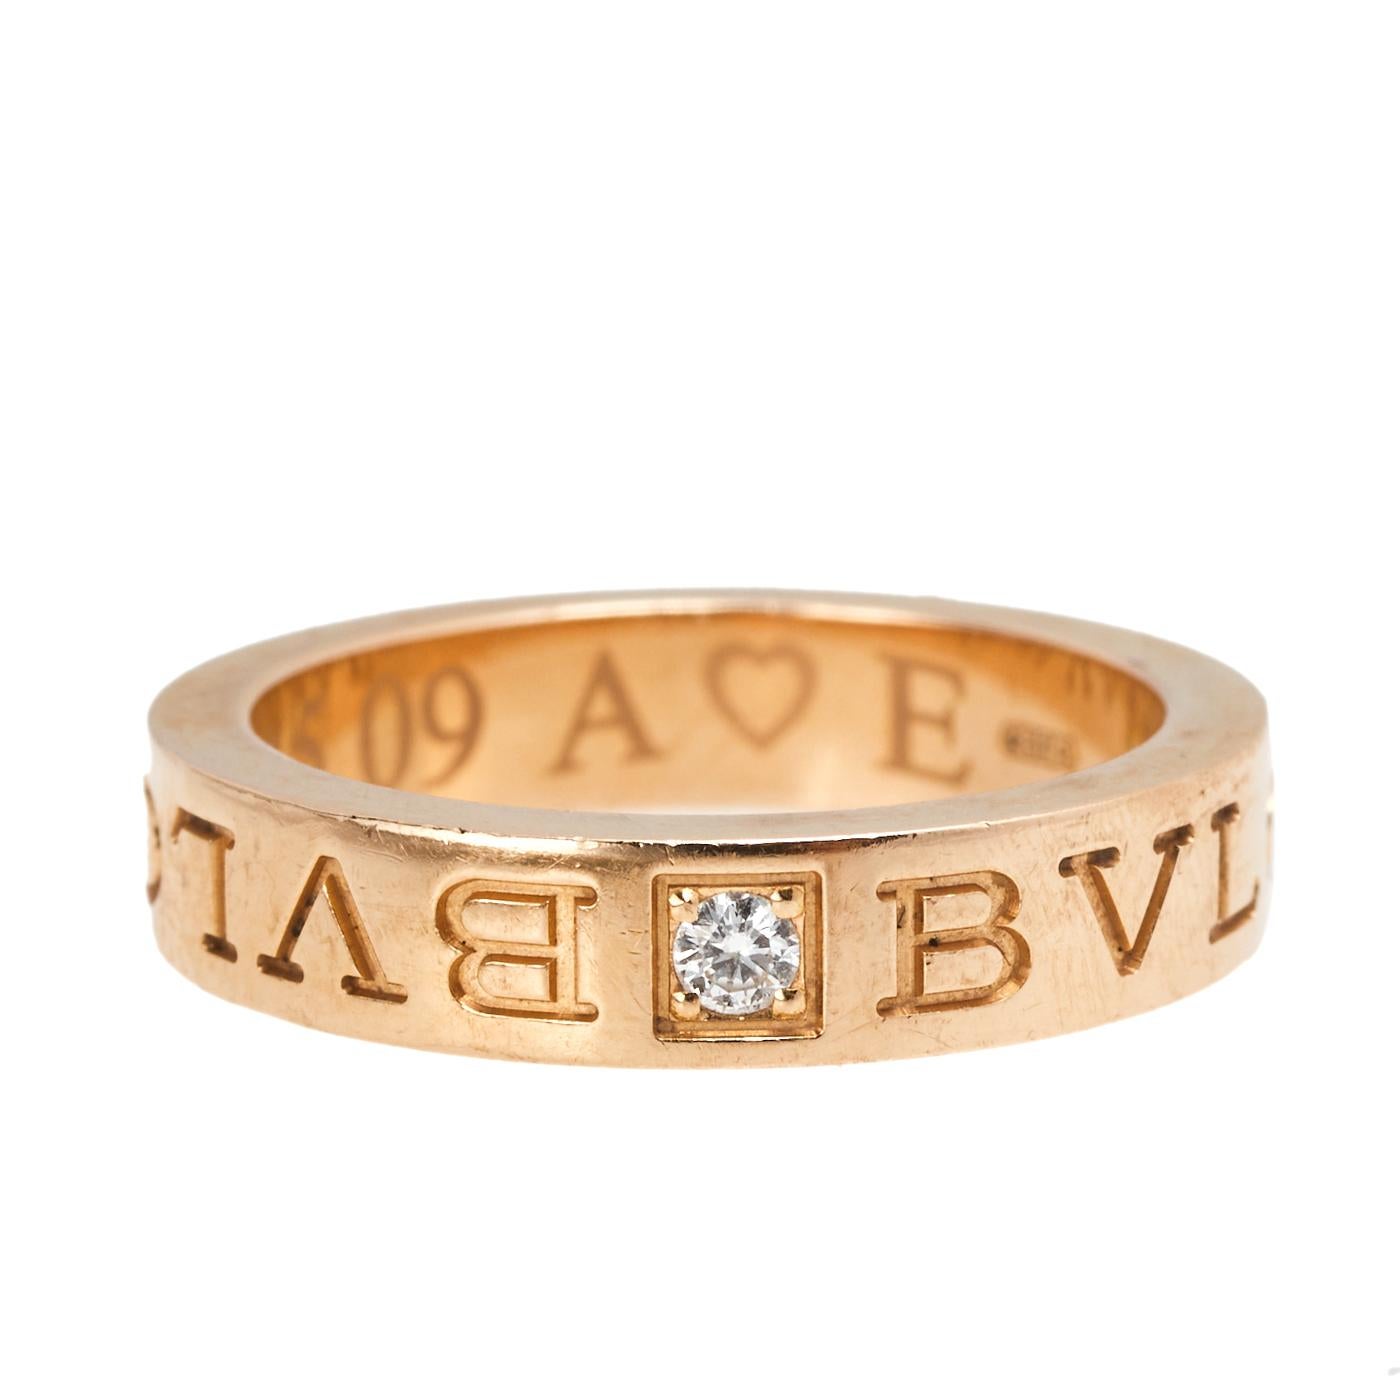 Well-crafted jewelry like this ring exudes creativity and style. This Bvlgari piece has been beautifully sculpted from 18k rose gold in Italy and detailed with the brand's logo meticulously engraved around it. The neat engravings are joined in